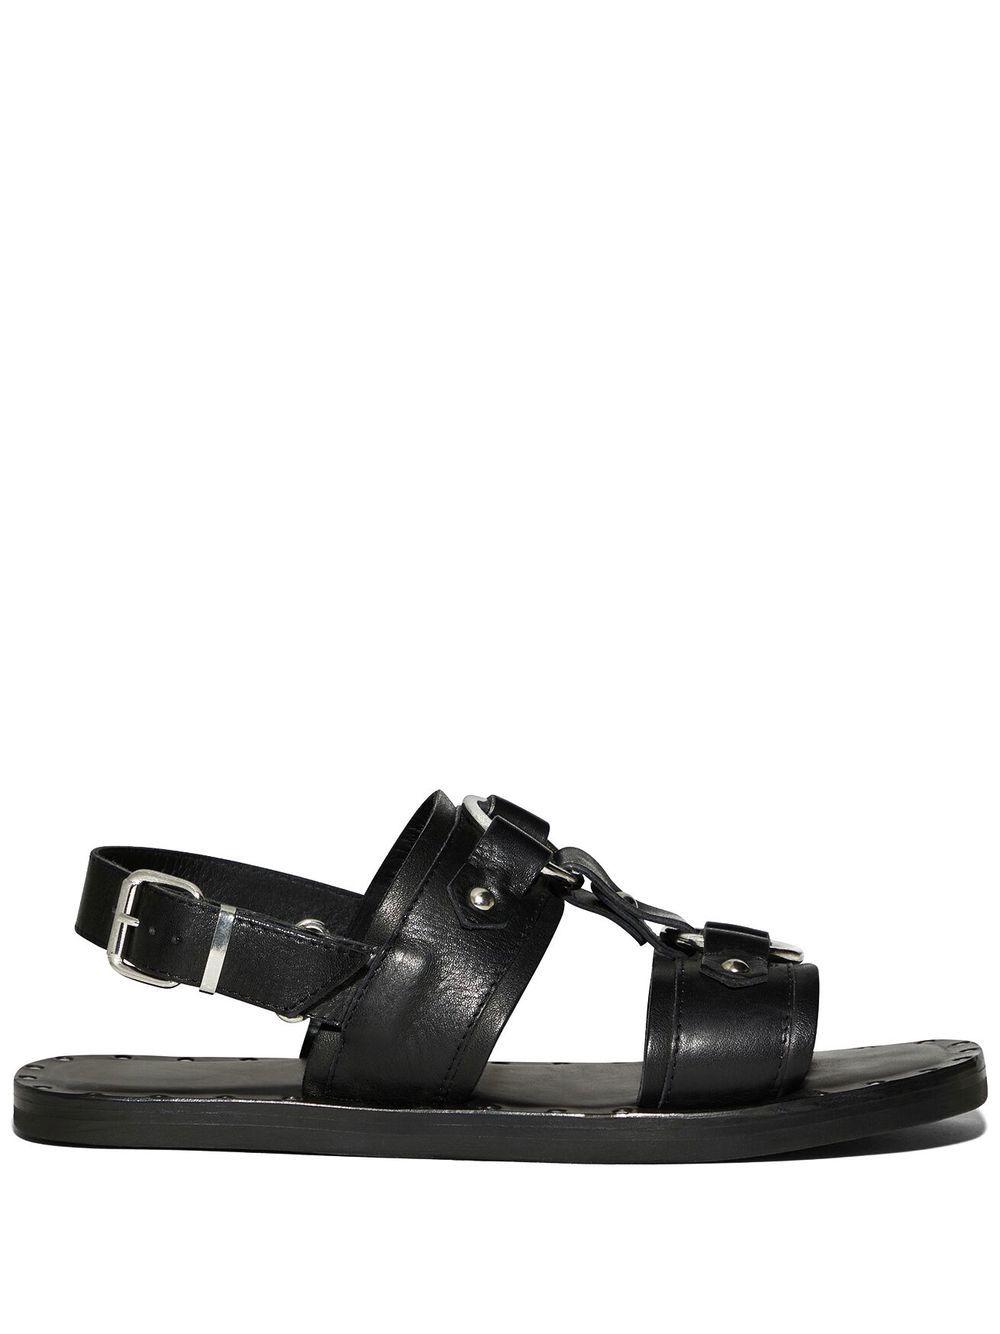 DSquared² Stud-detail Calf-leather Sandals in Black for Men | Lyst